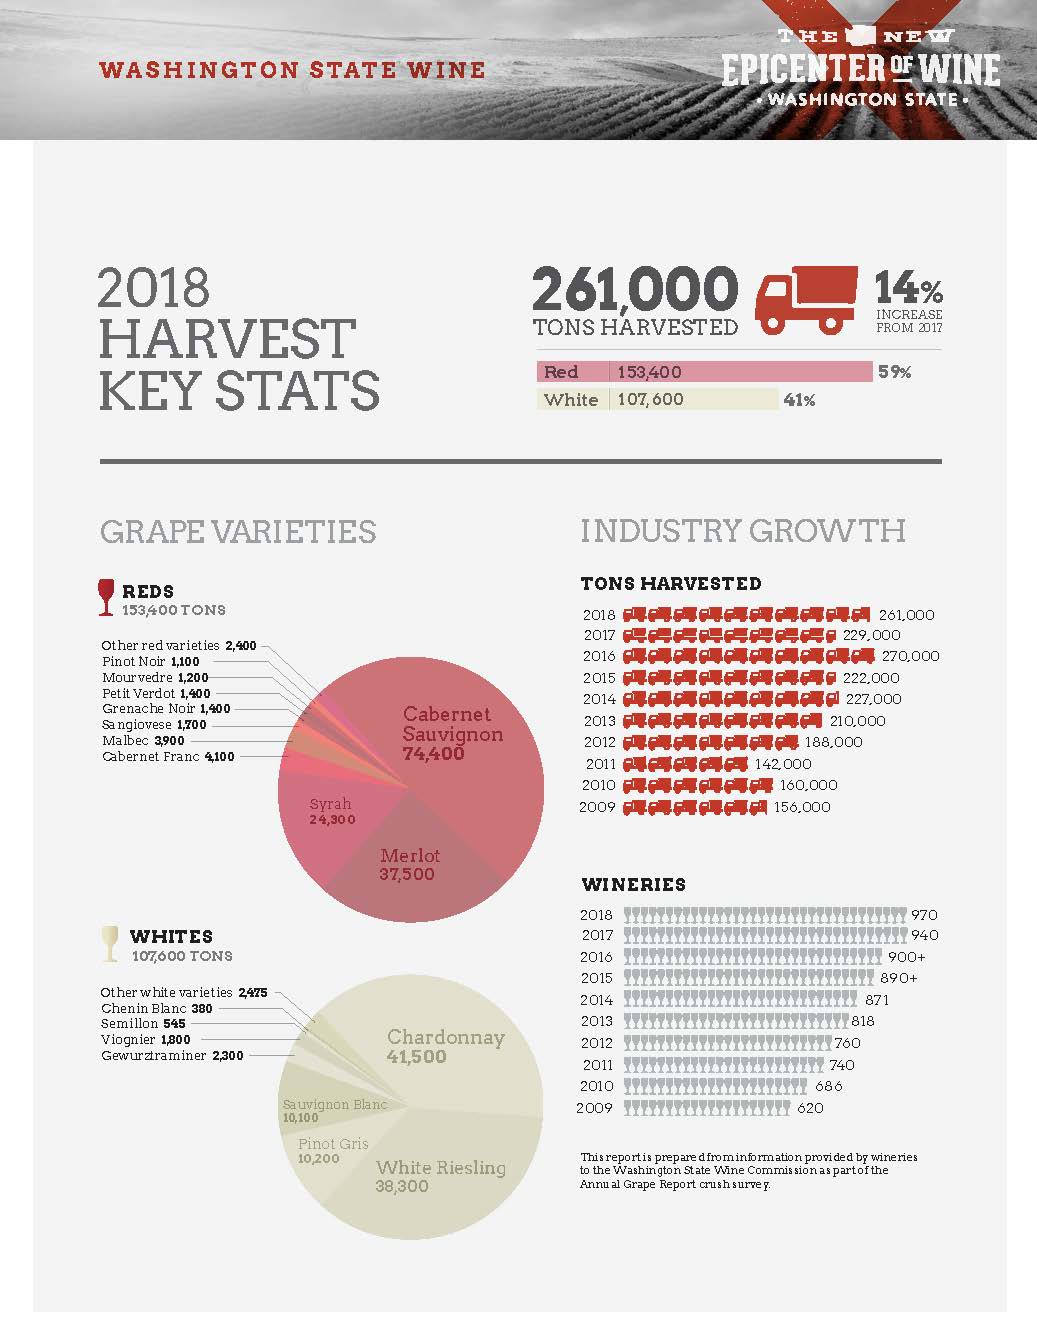 Infographic showing the 2018 Harvest Key Stats for Washington